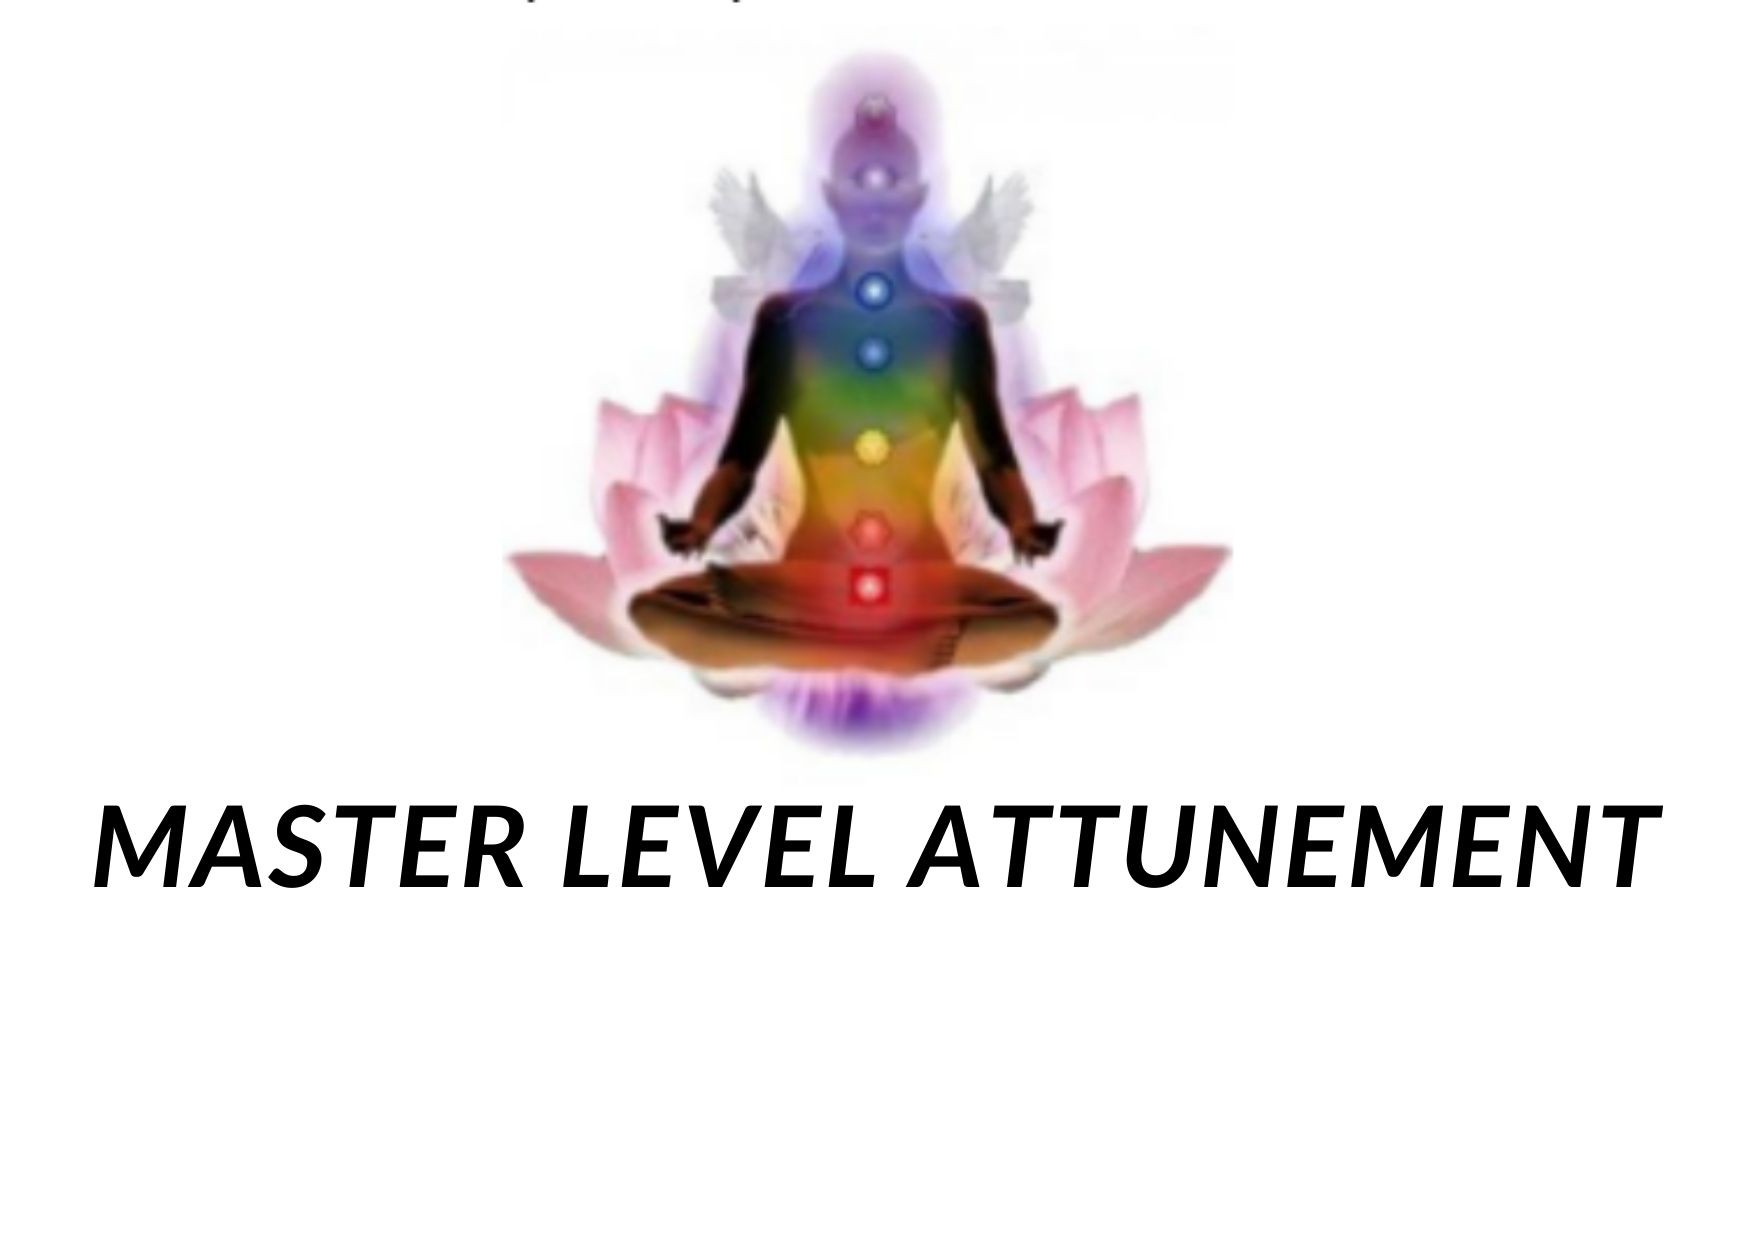 How To Do The Reiki Master Level Attunement?